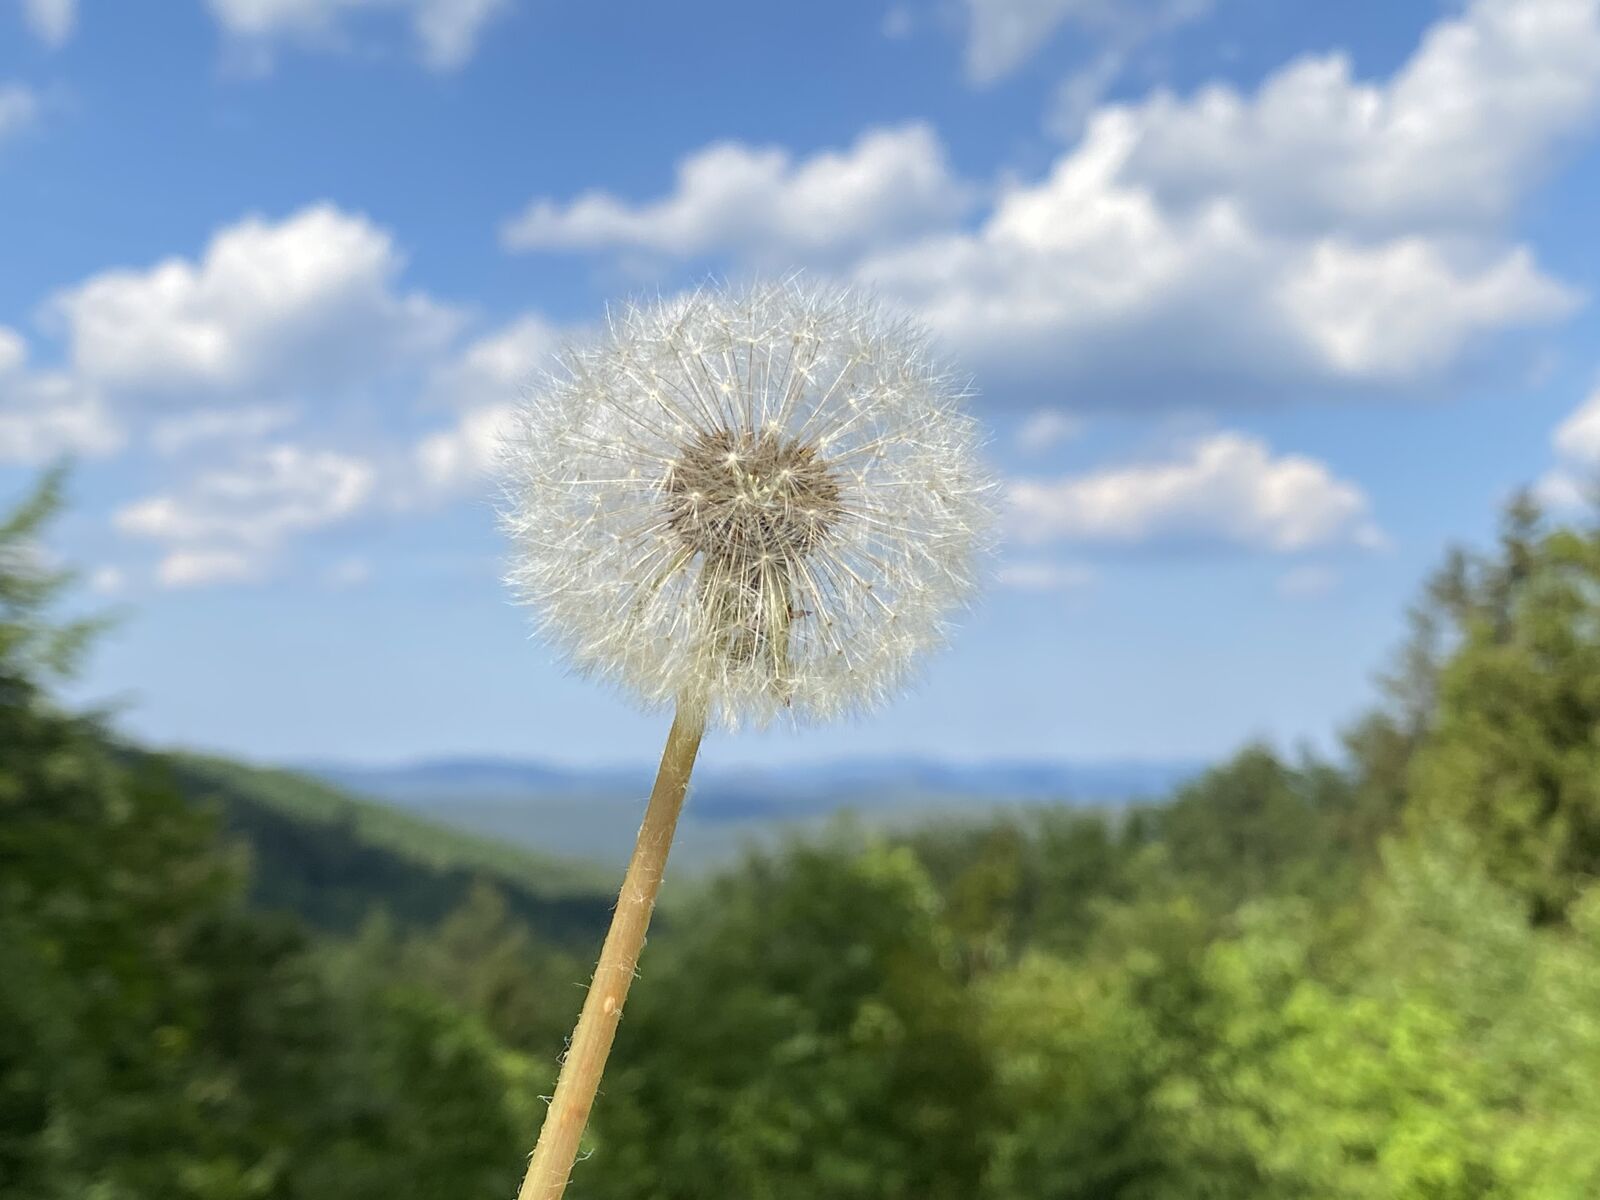 iPhone 11 Pro Max back triple camera 4.25mm f/1.8 sample photo. Dandelion, sky, forest photography